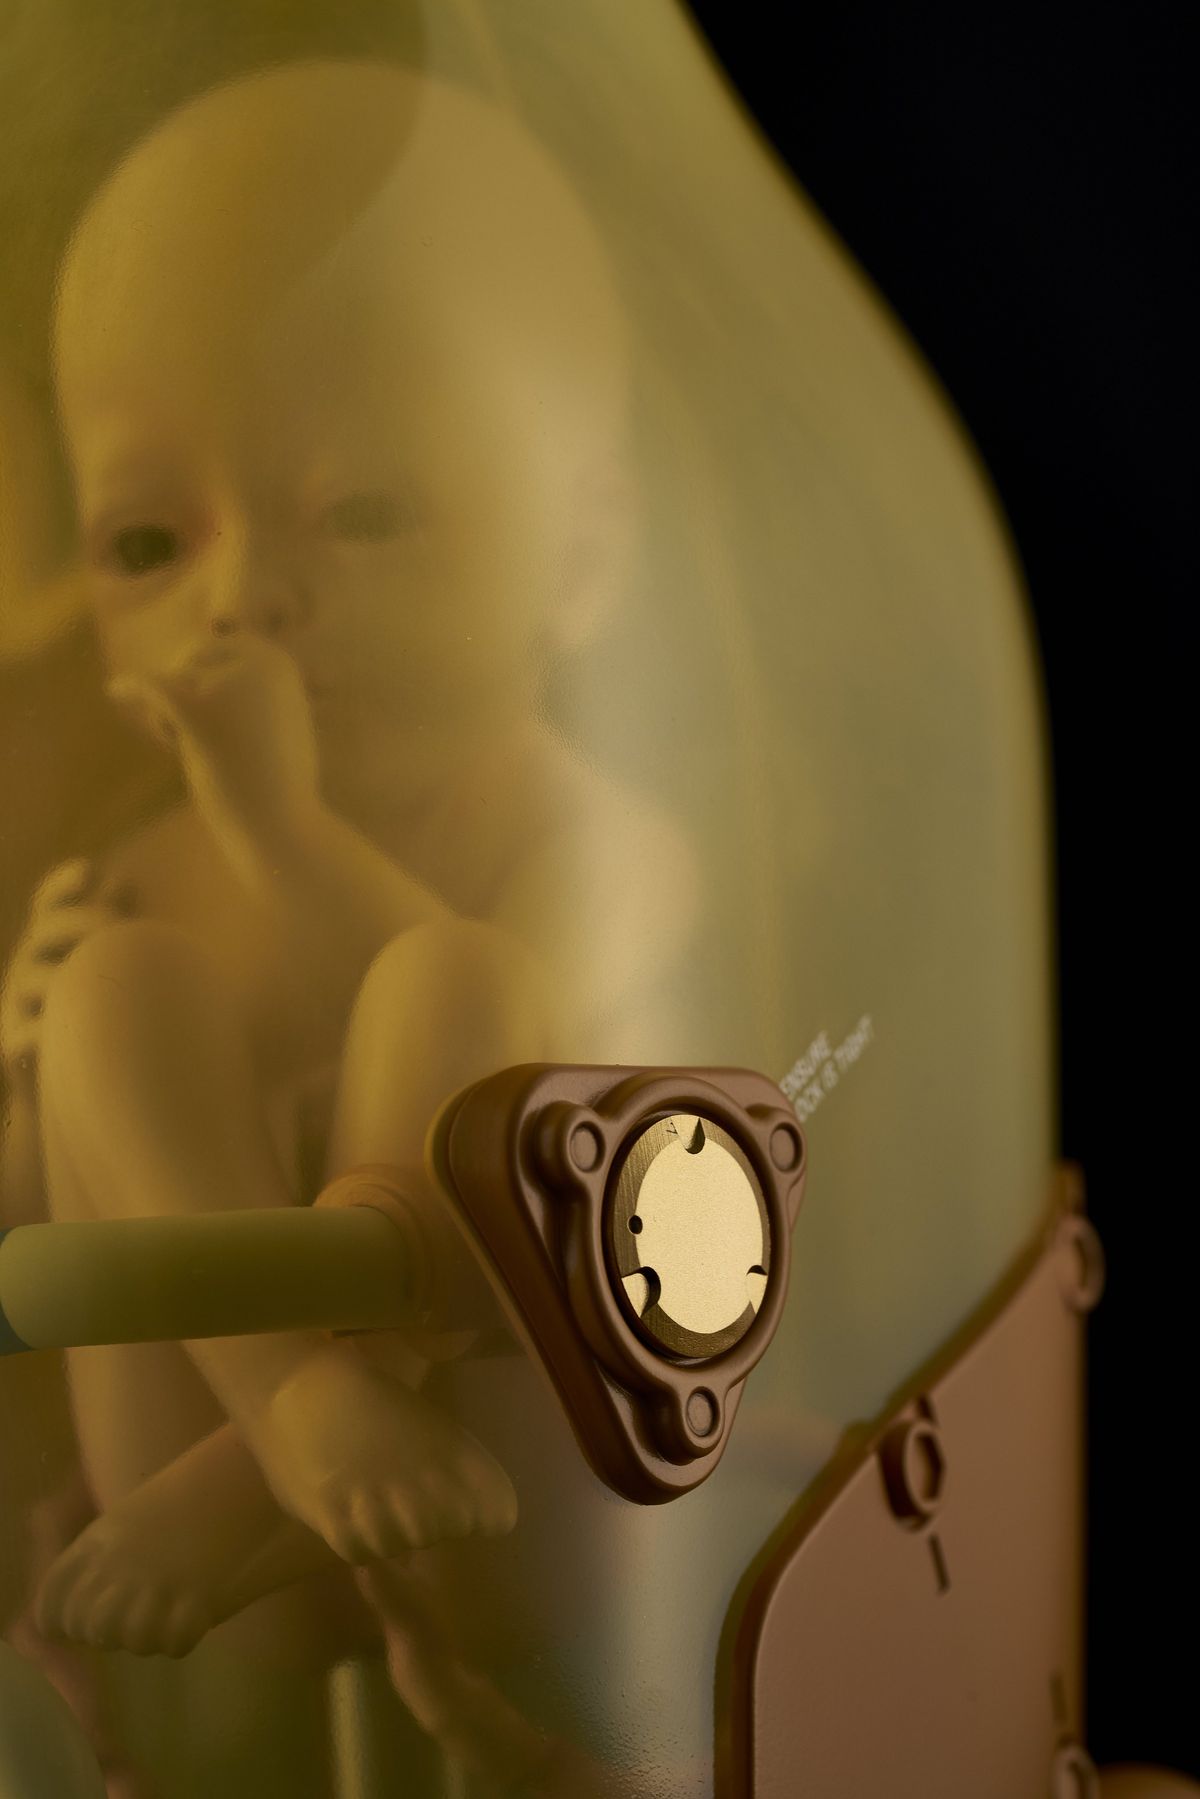 You Can Use This Death Stranding Bb Collectible As A Lamp If